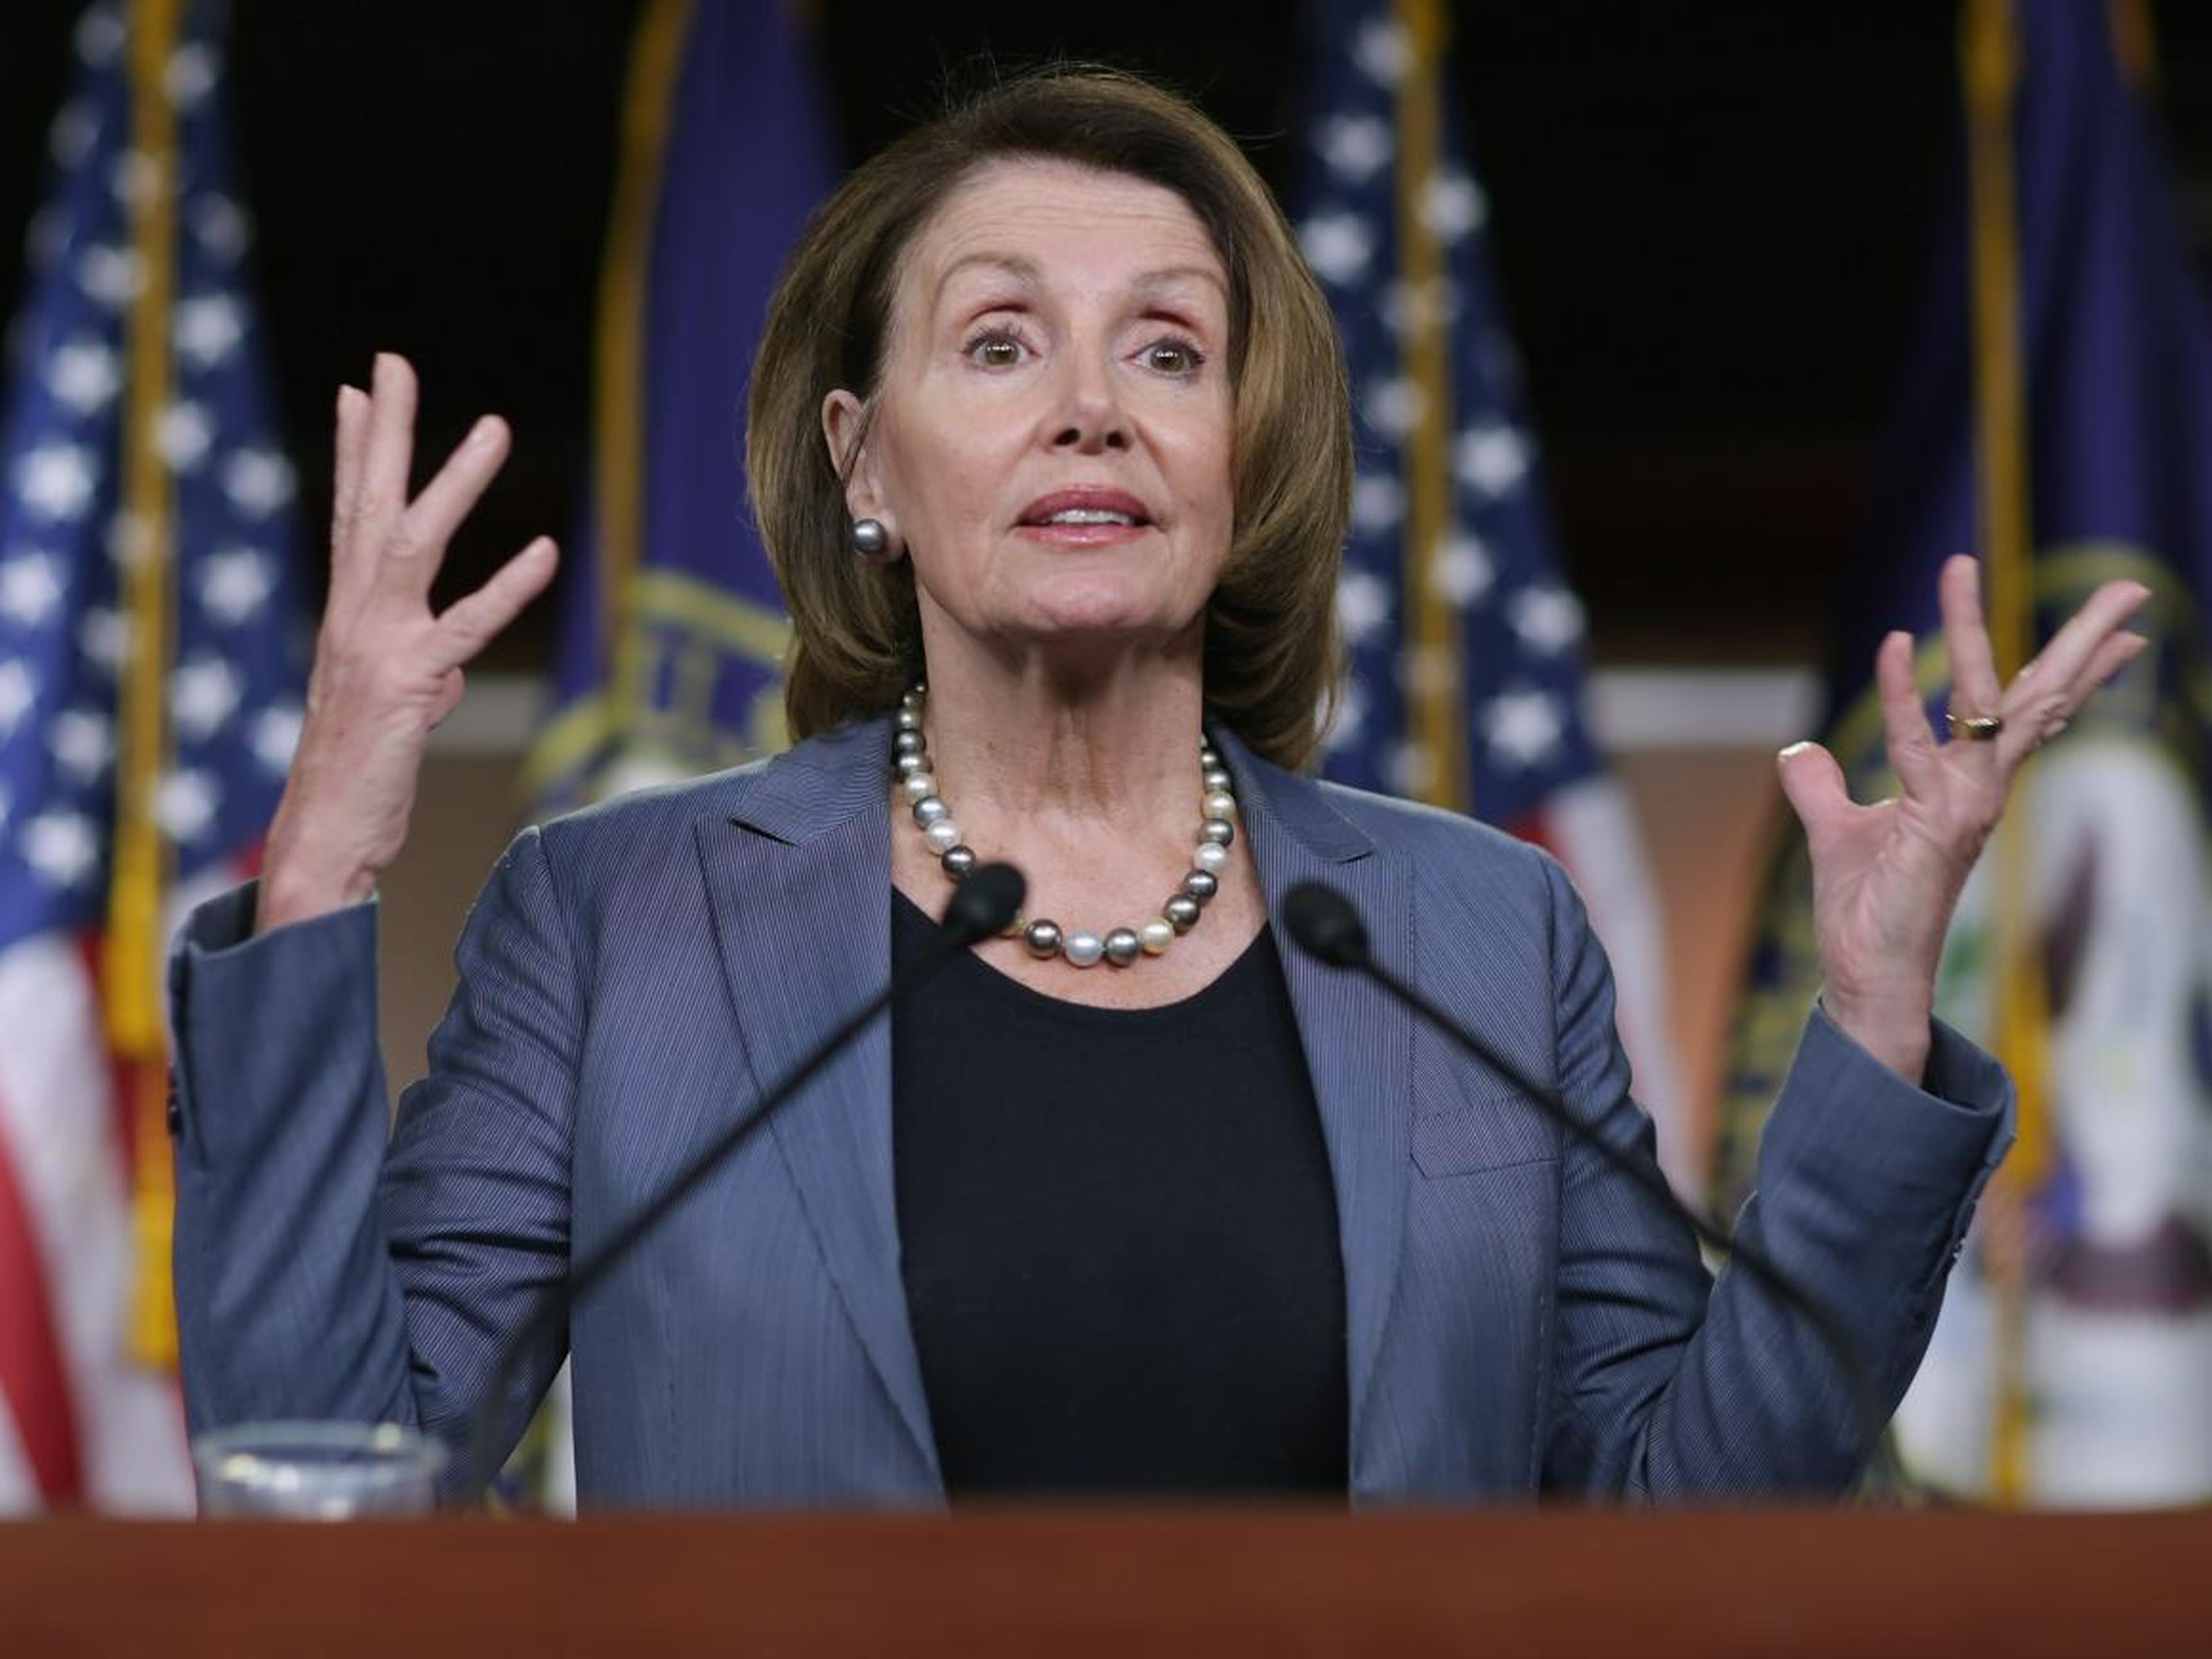 Nancy Pelosi was the first female Speaker of the United States House of Representatives in 2007.